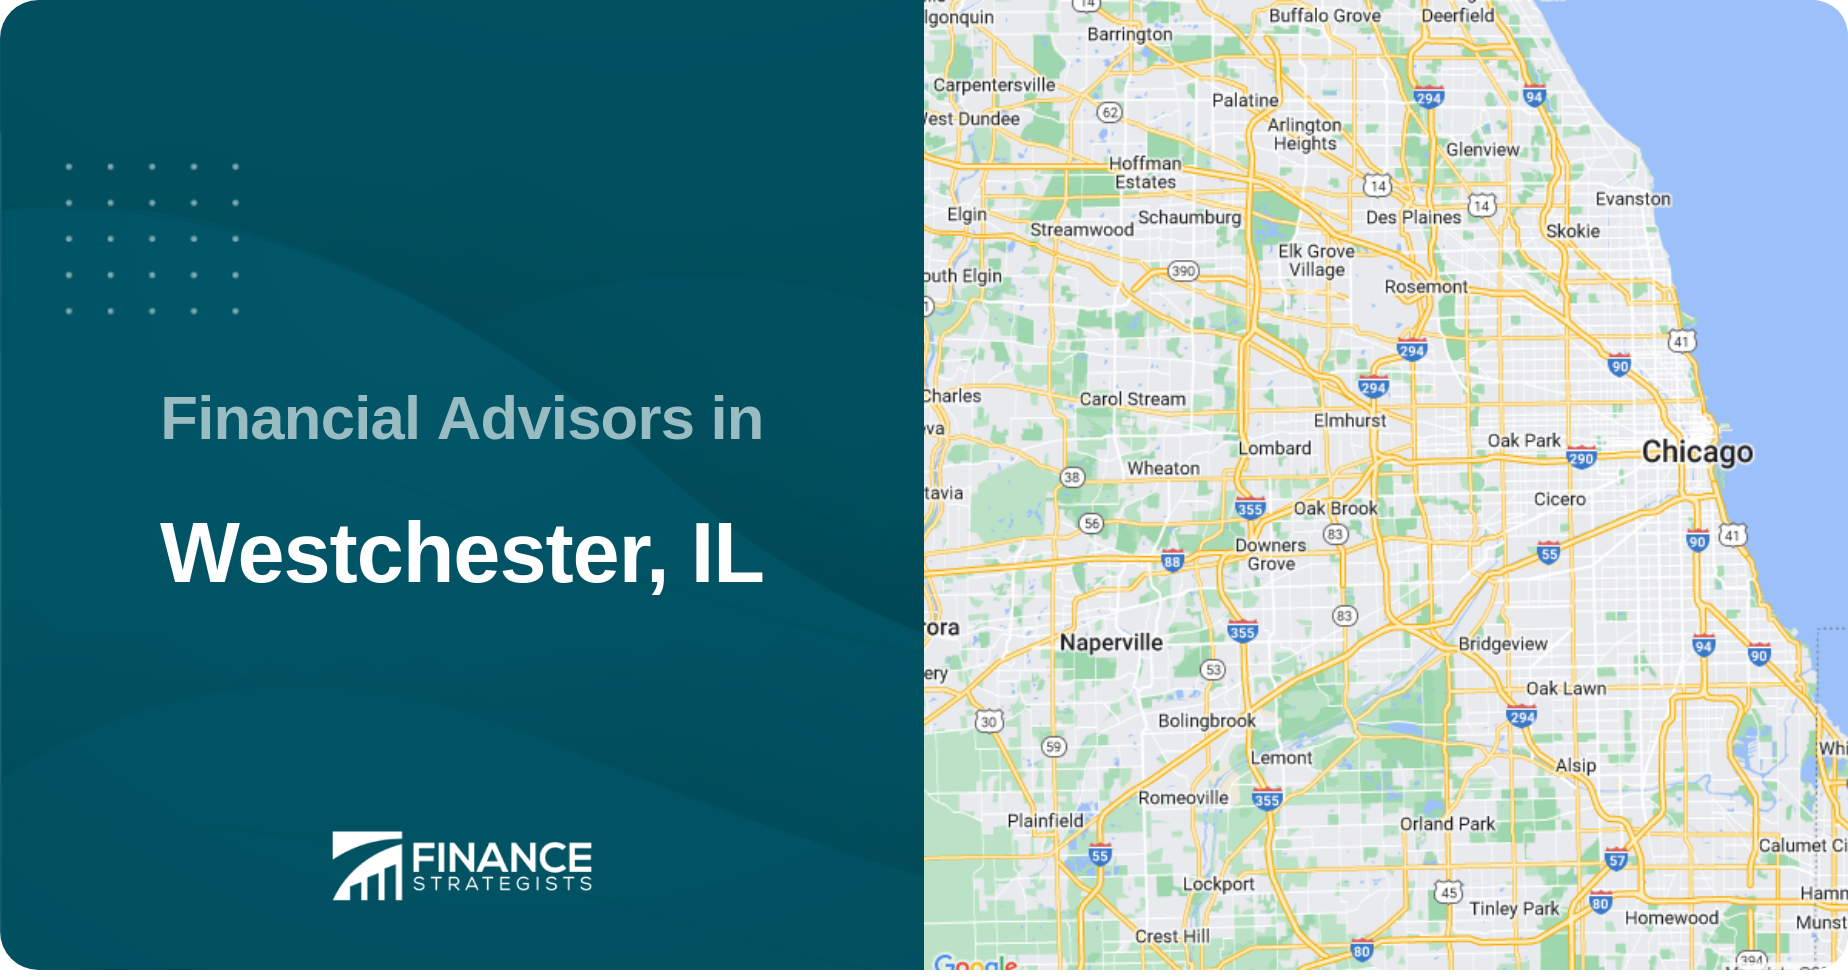 Financial Advisors in Westchester, IL